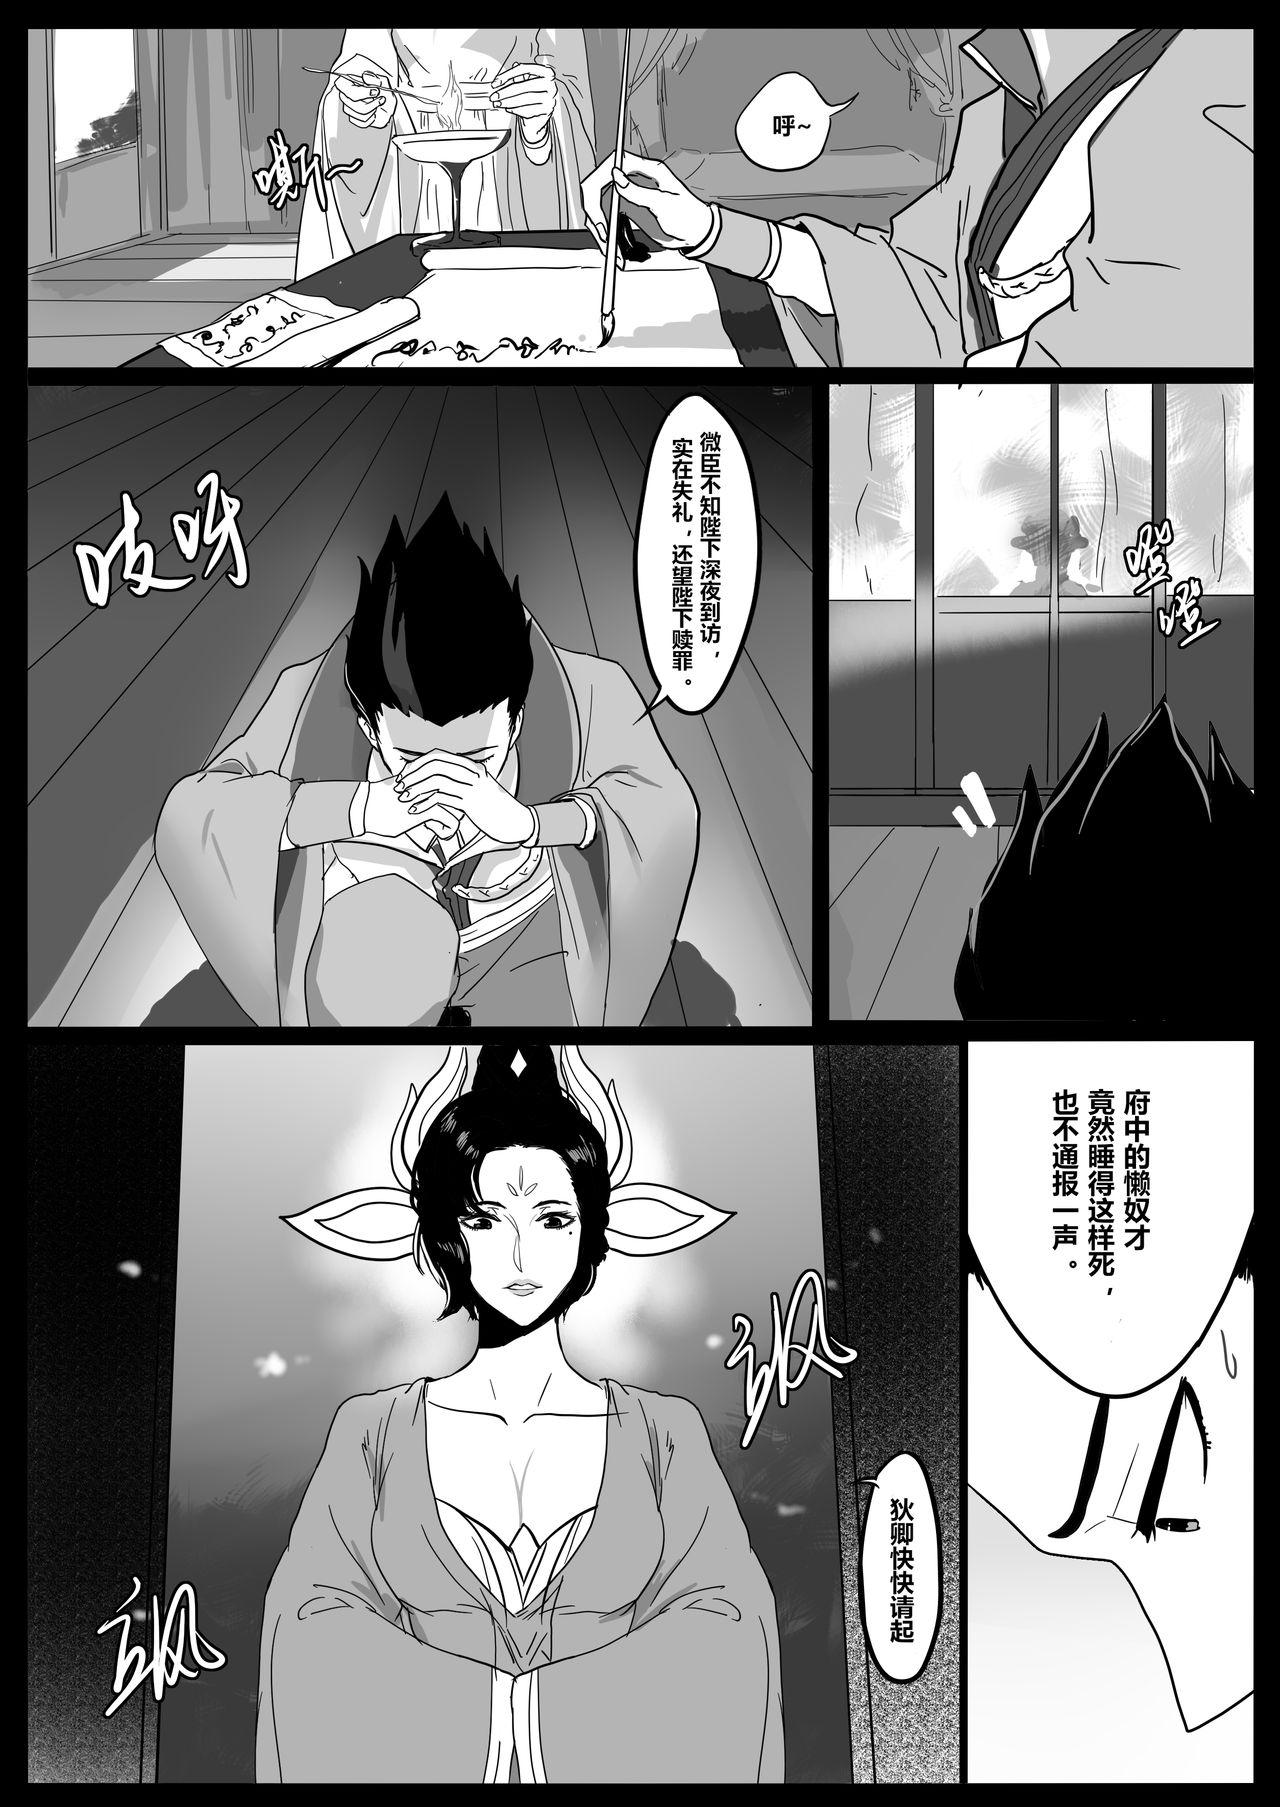 Student 女帝本（Bbbs） - Arena of valor Gay Shorthair - Page 6